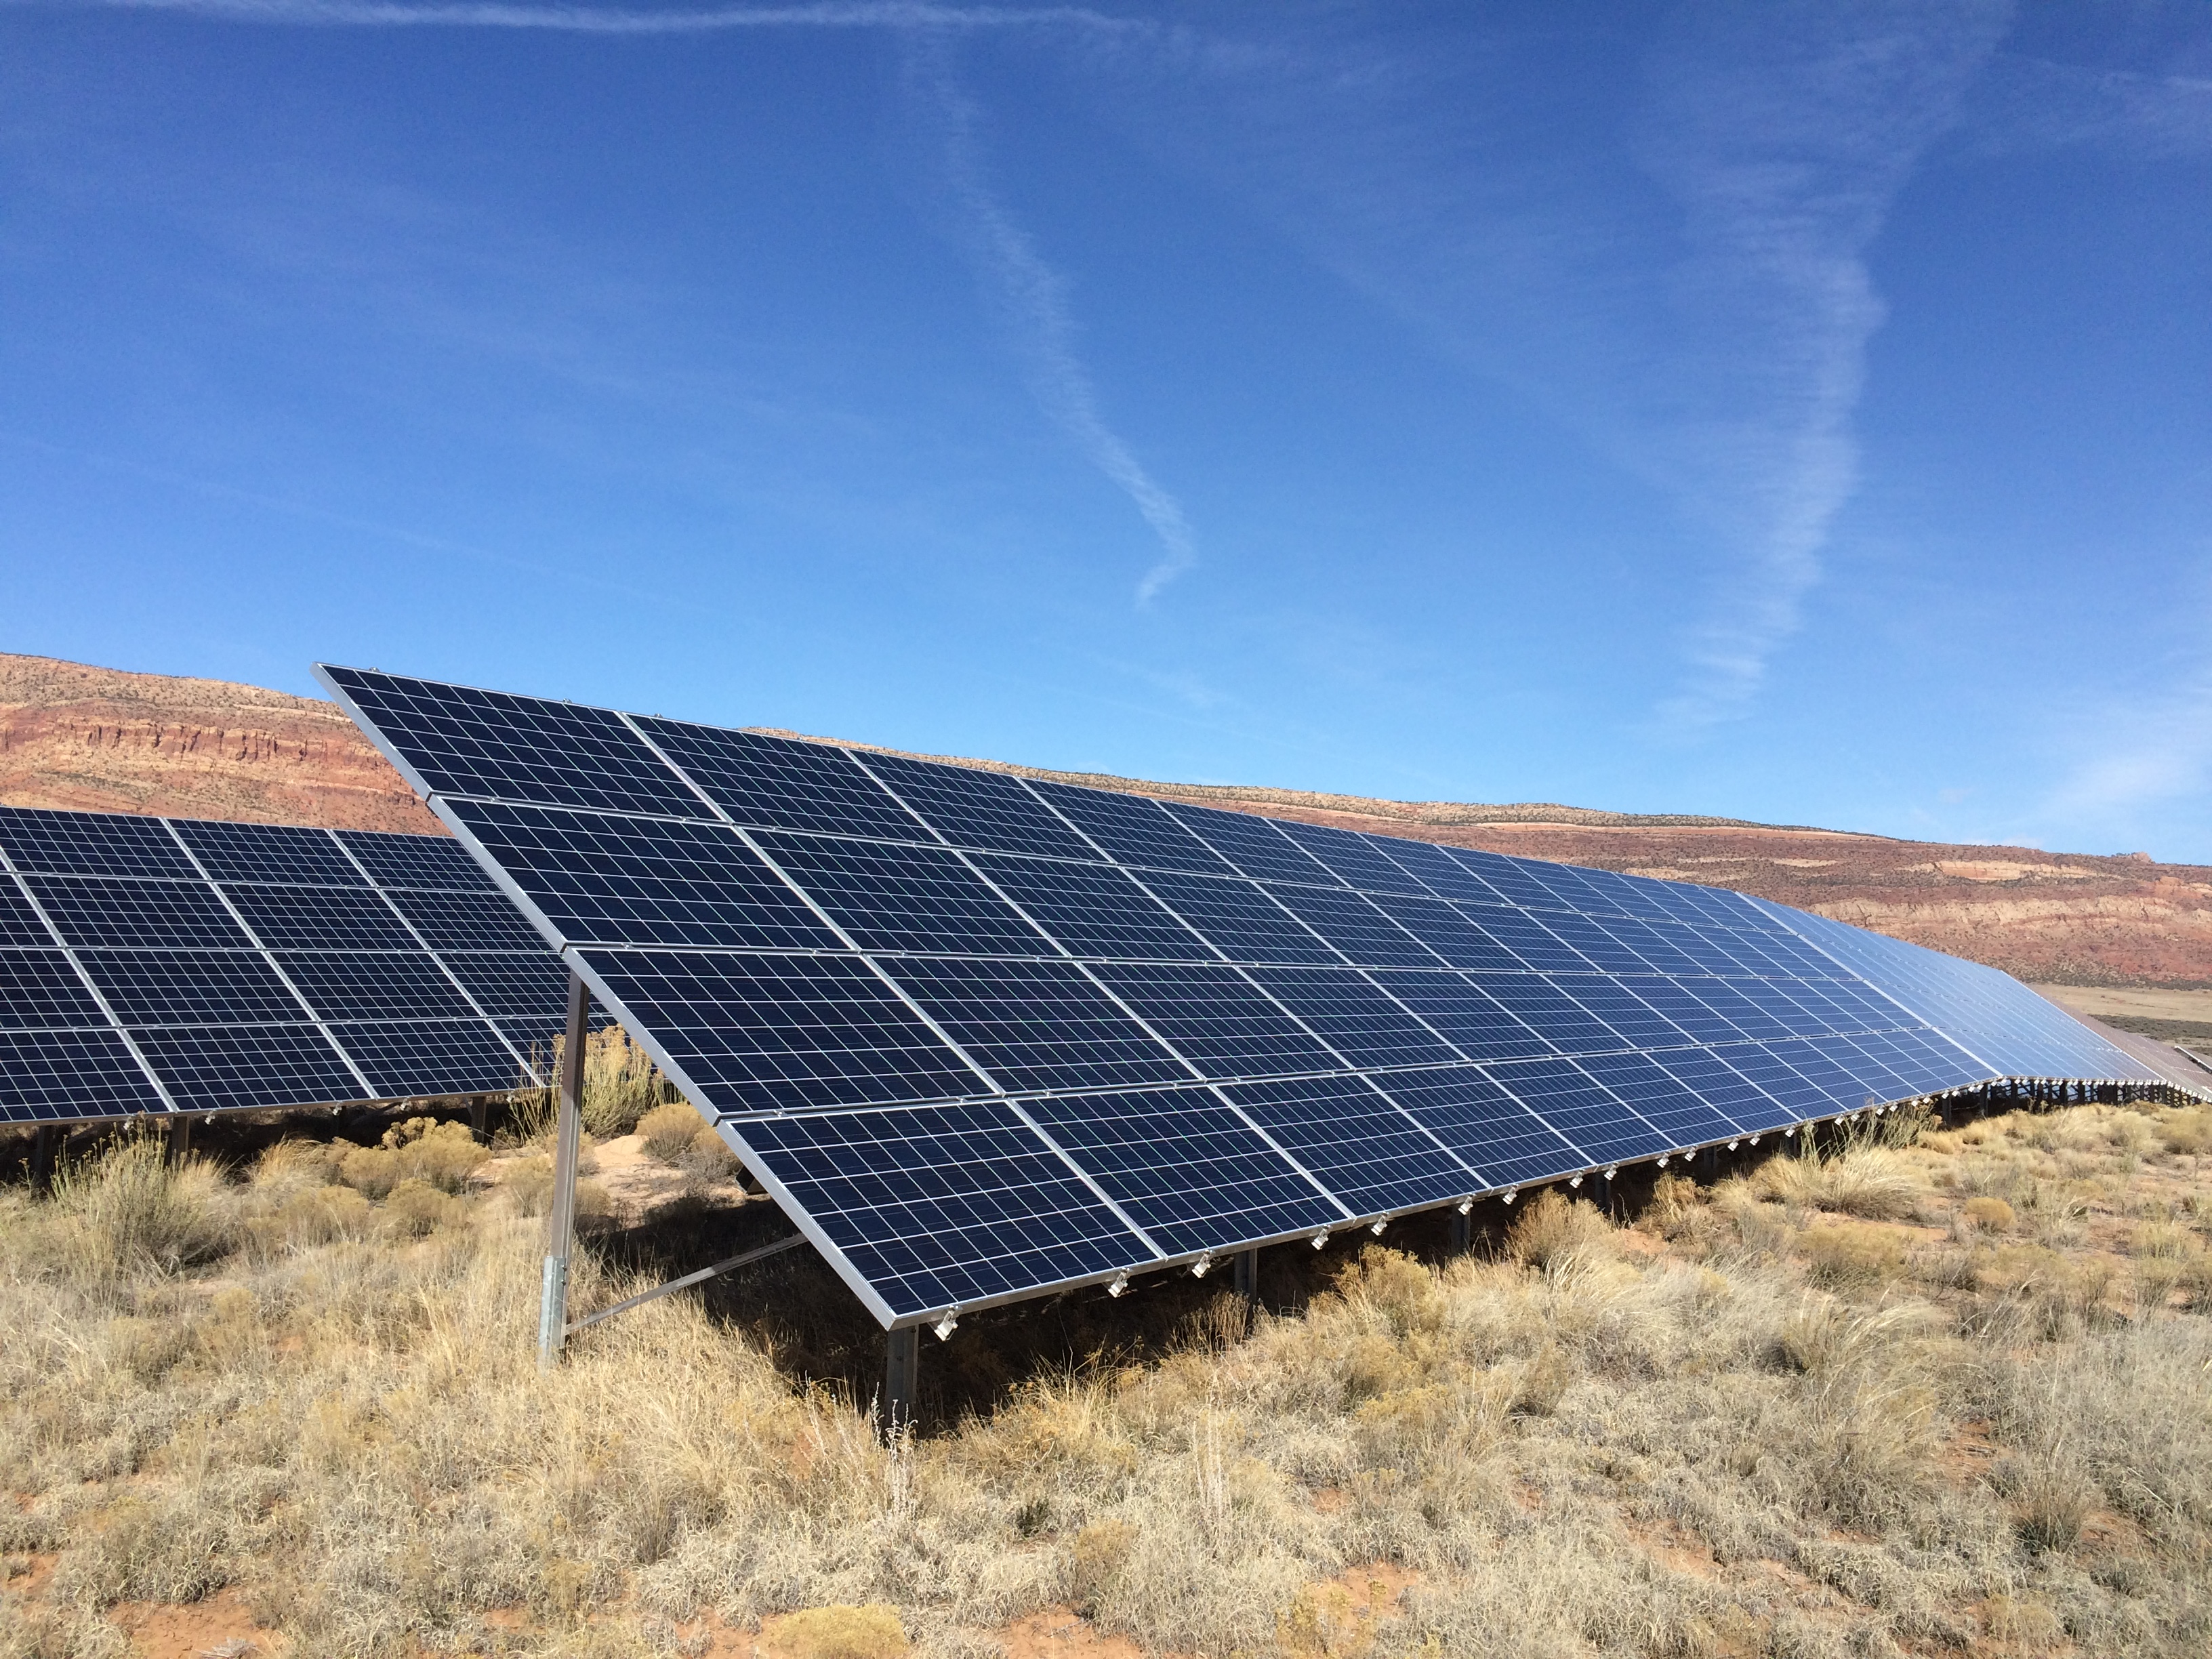 Image of solar panels in the Paradox Valley